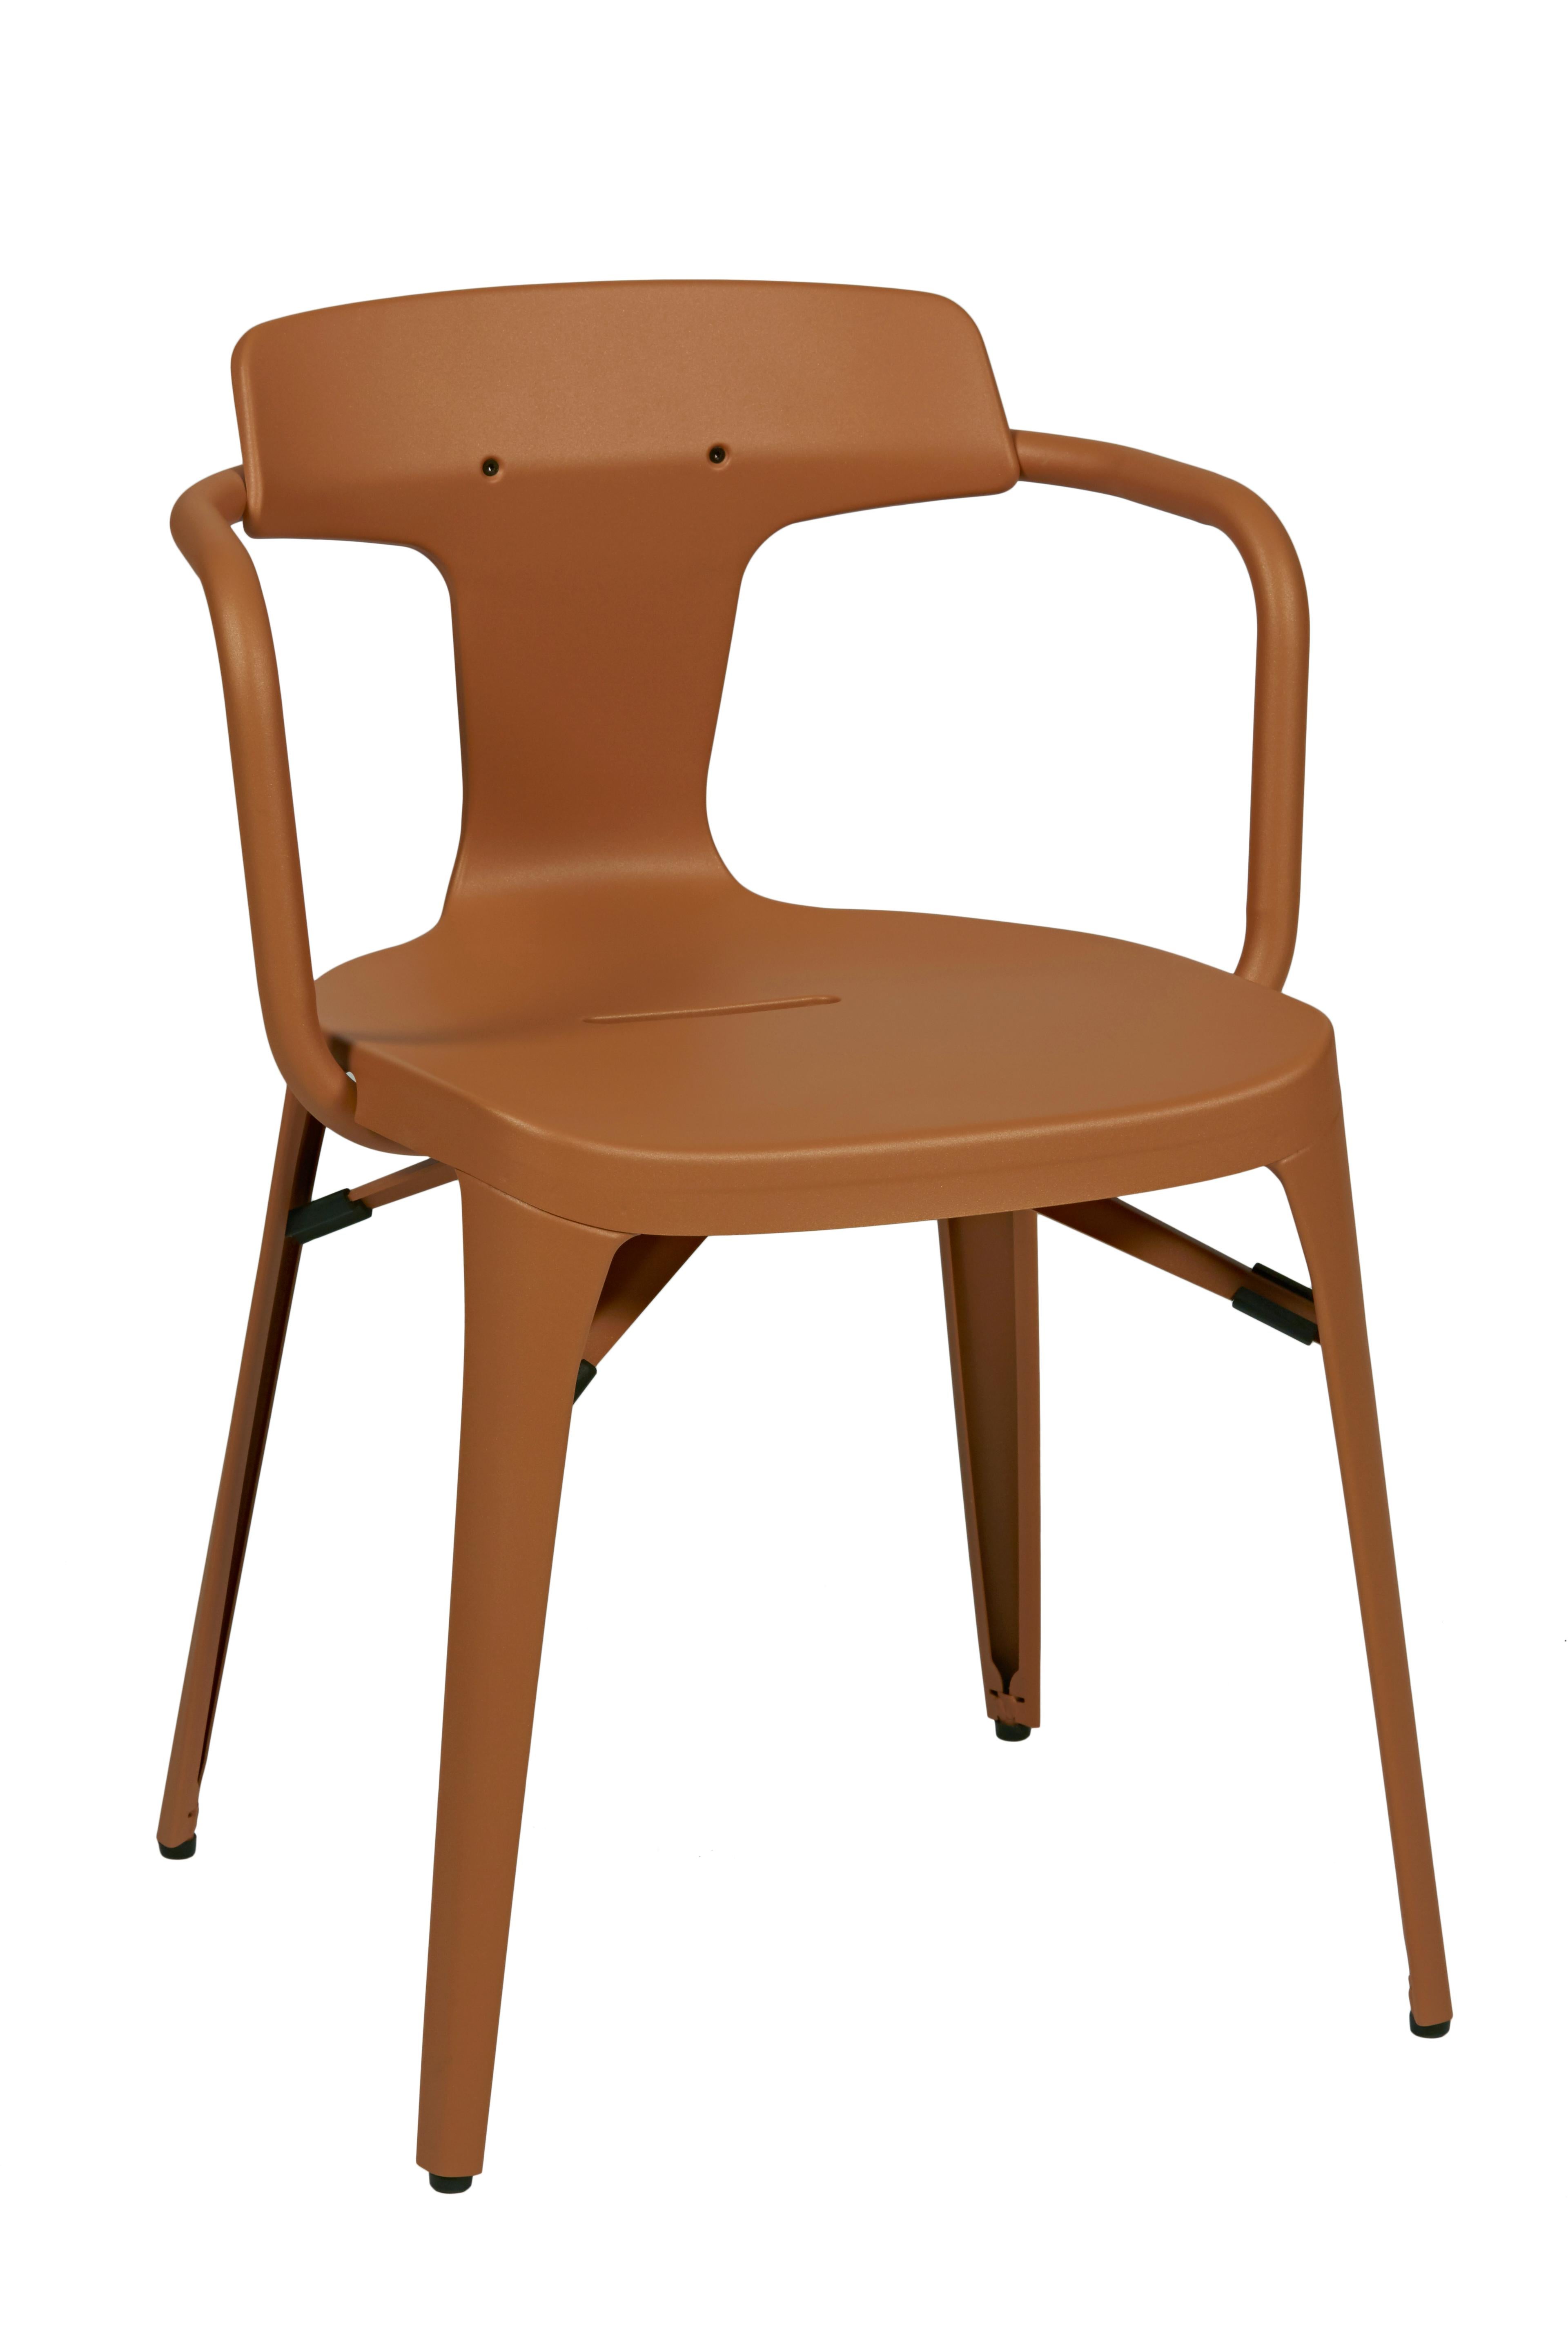 Im Angebot: T14 Chair in Pop Colors by Patrick Norguet and Tolix, Orange (Terracotta) 3